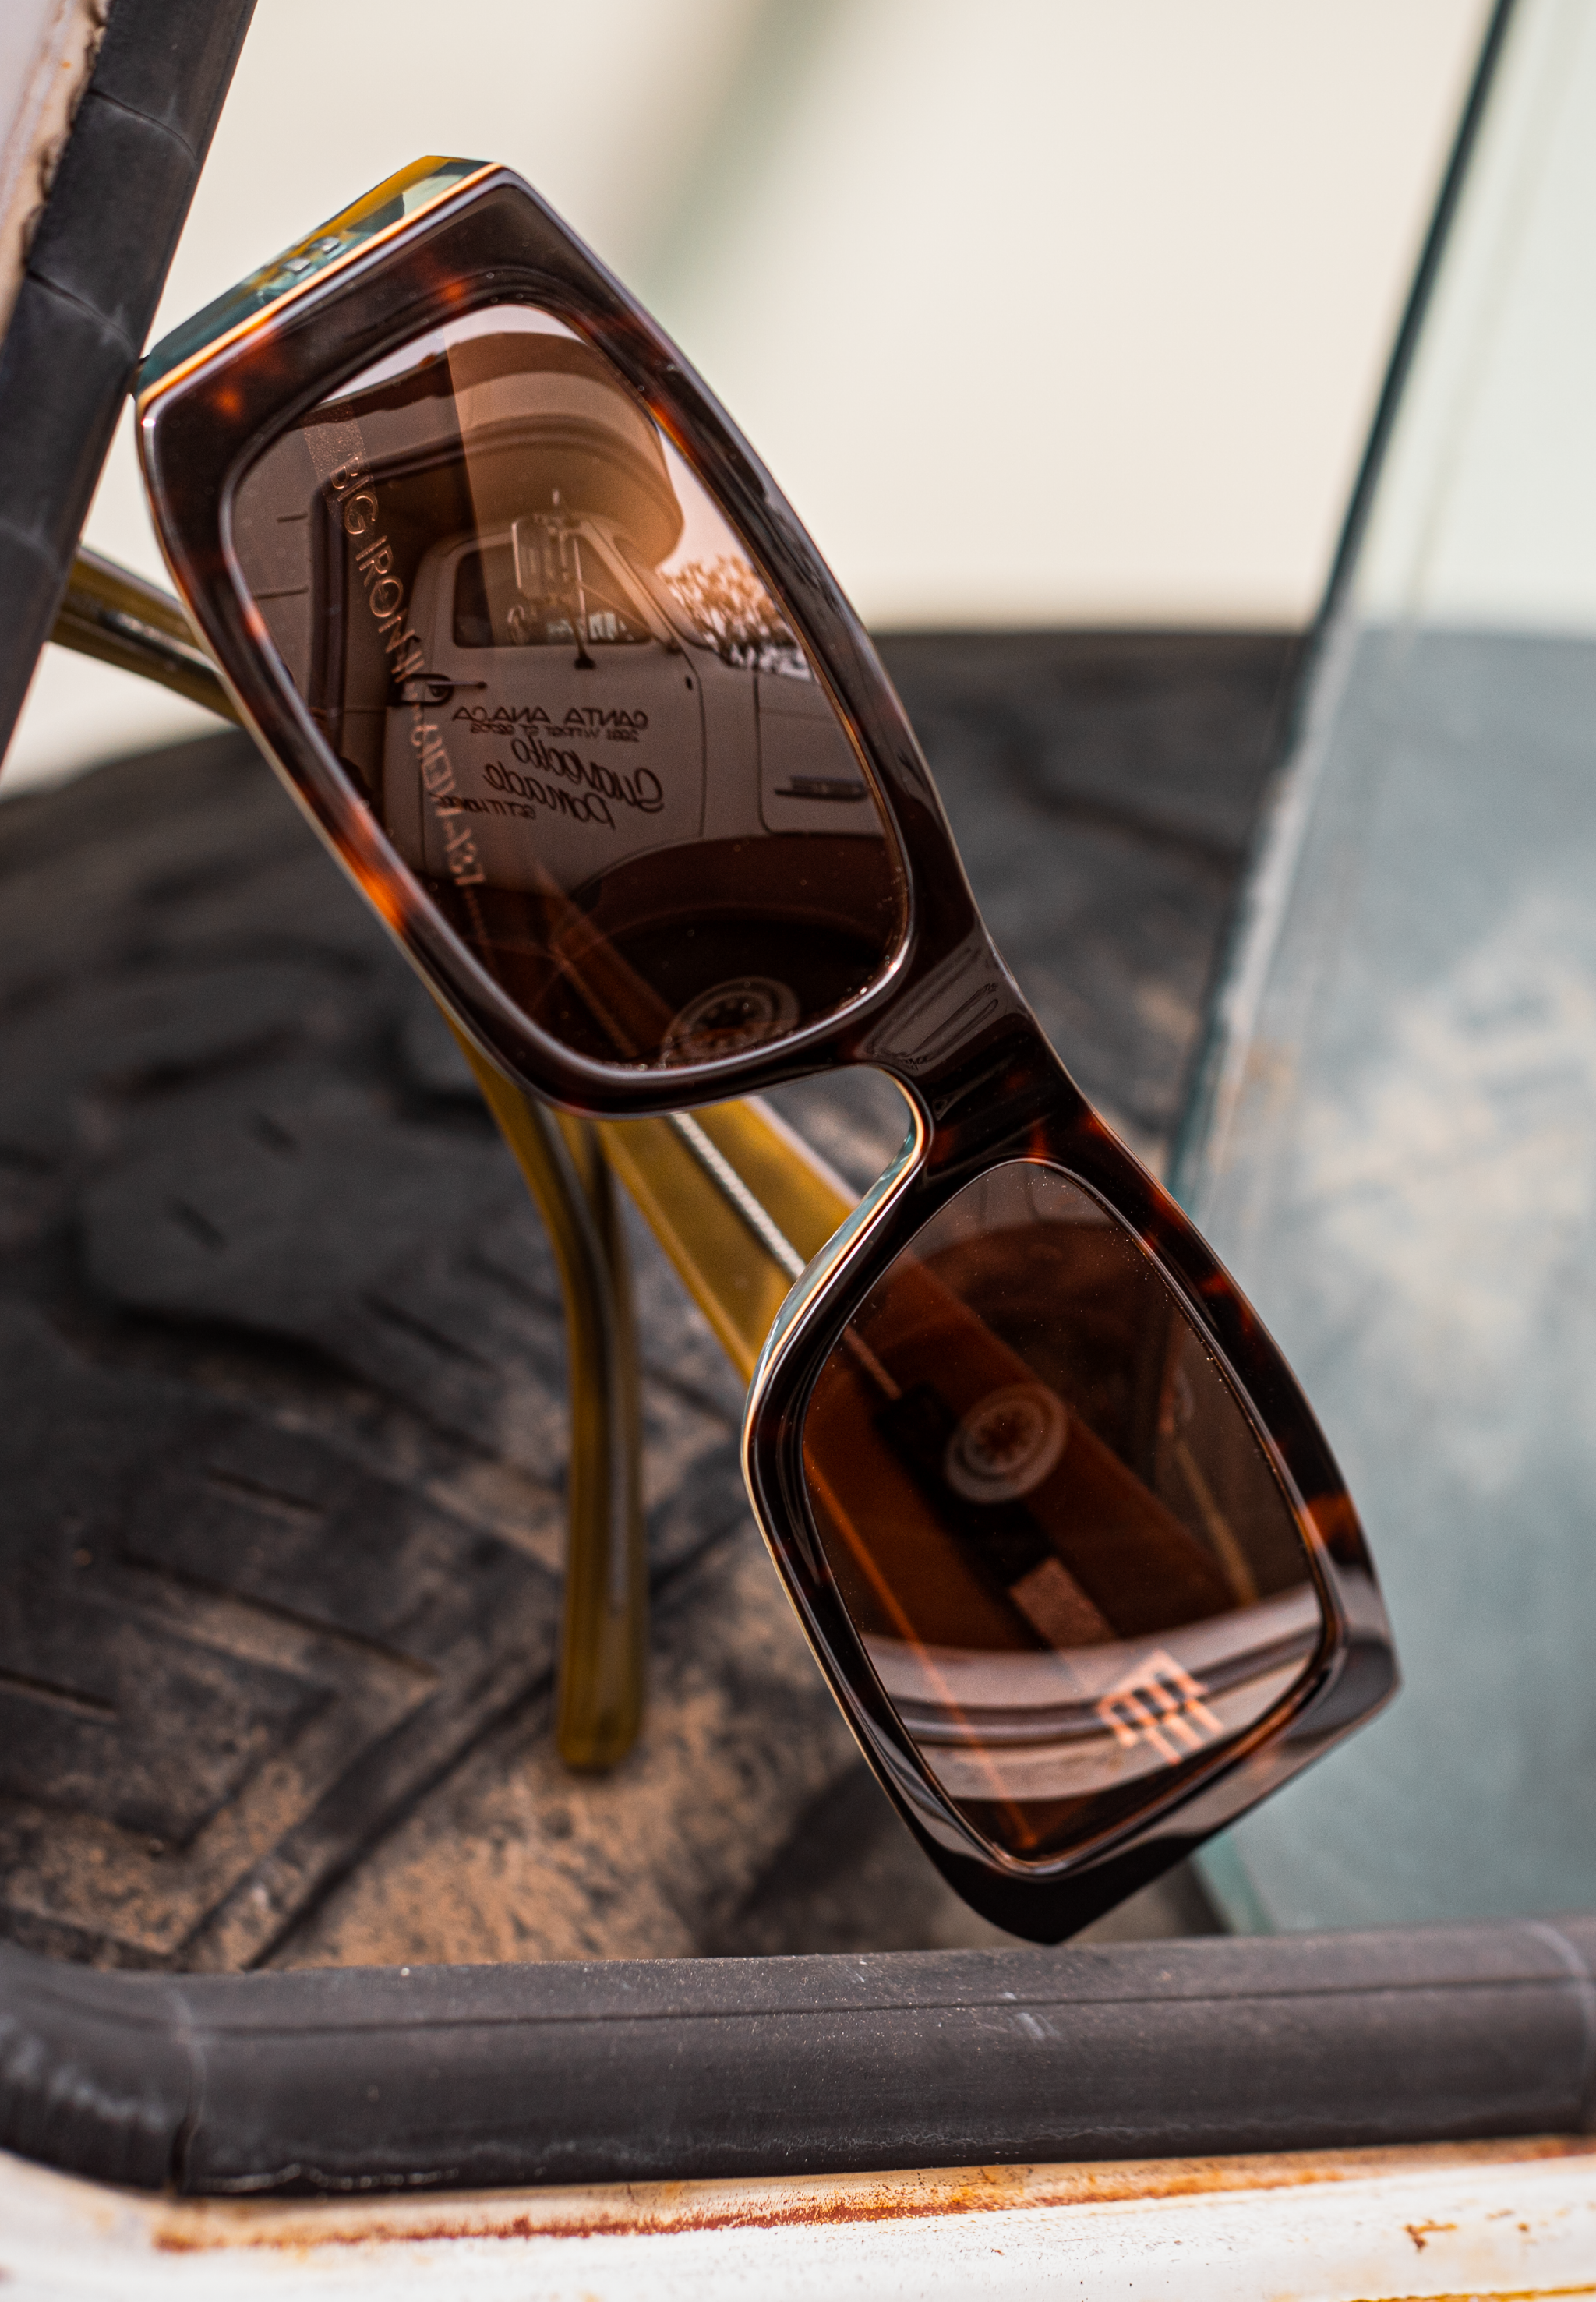 Tortoise Big Iron II sunglasses leaning at an angle on a distressed surface